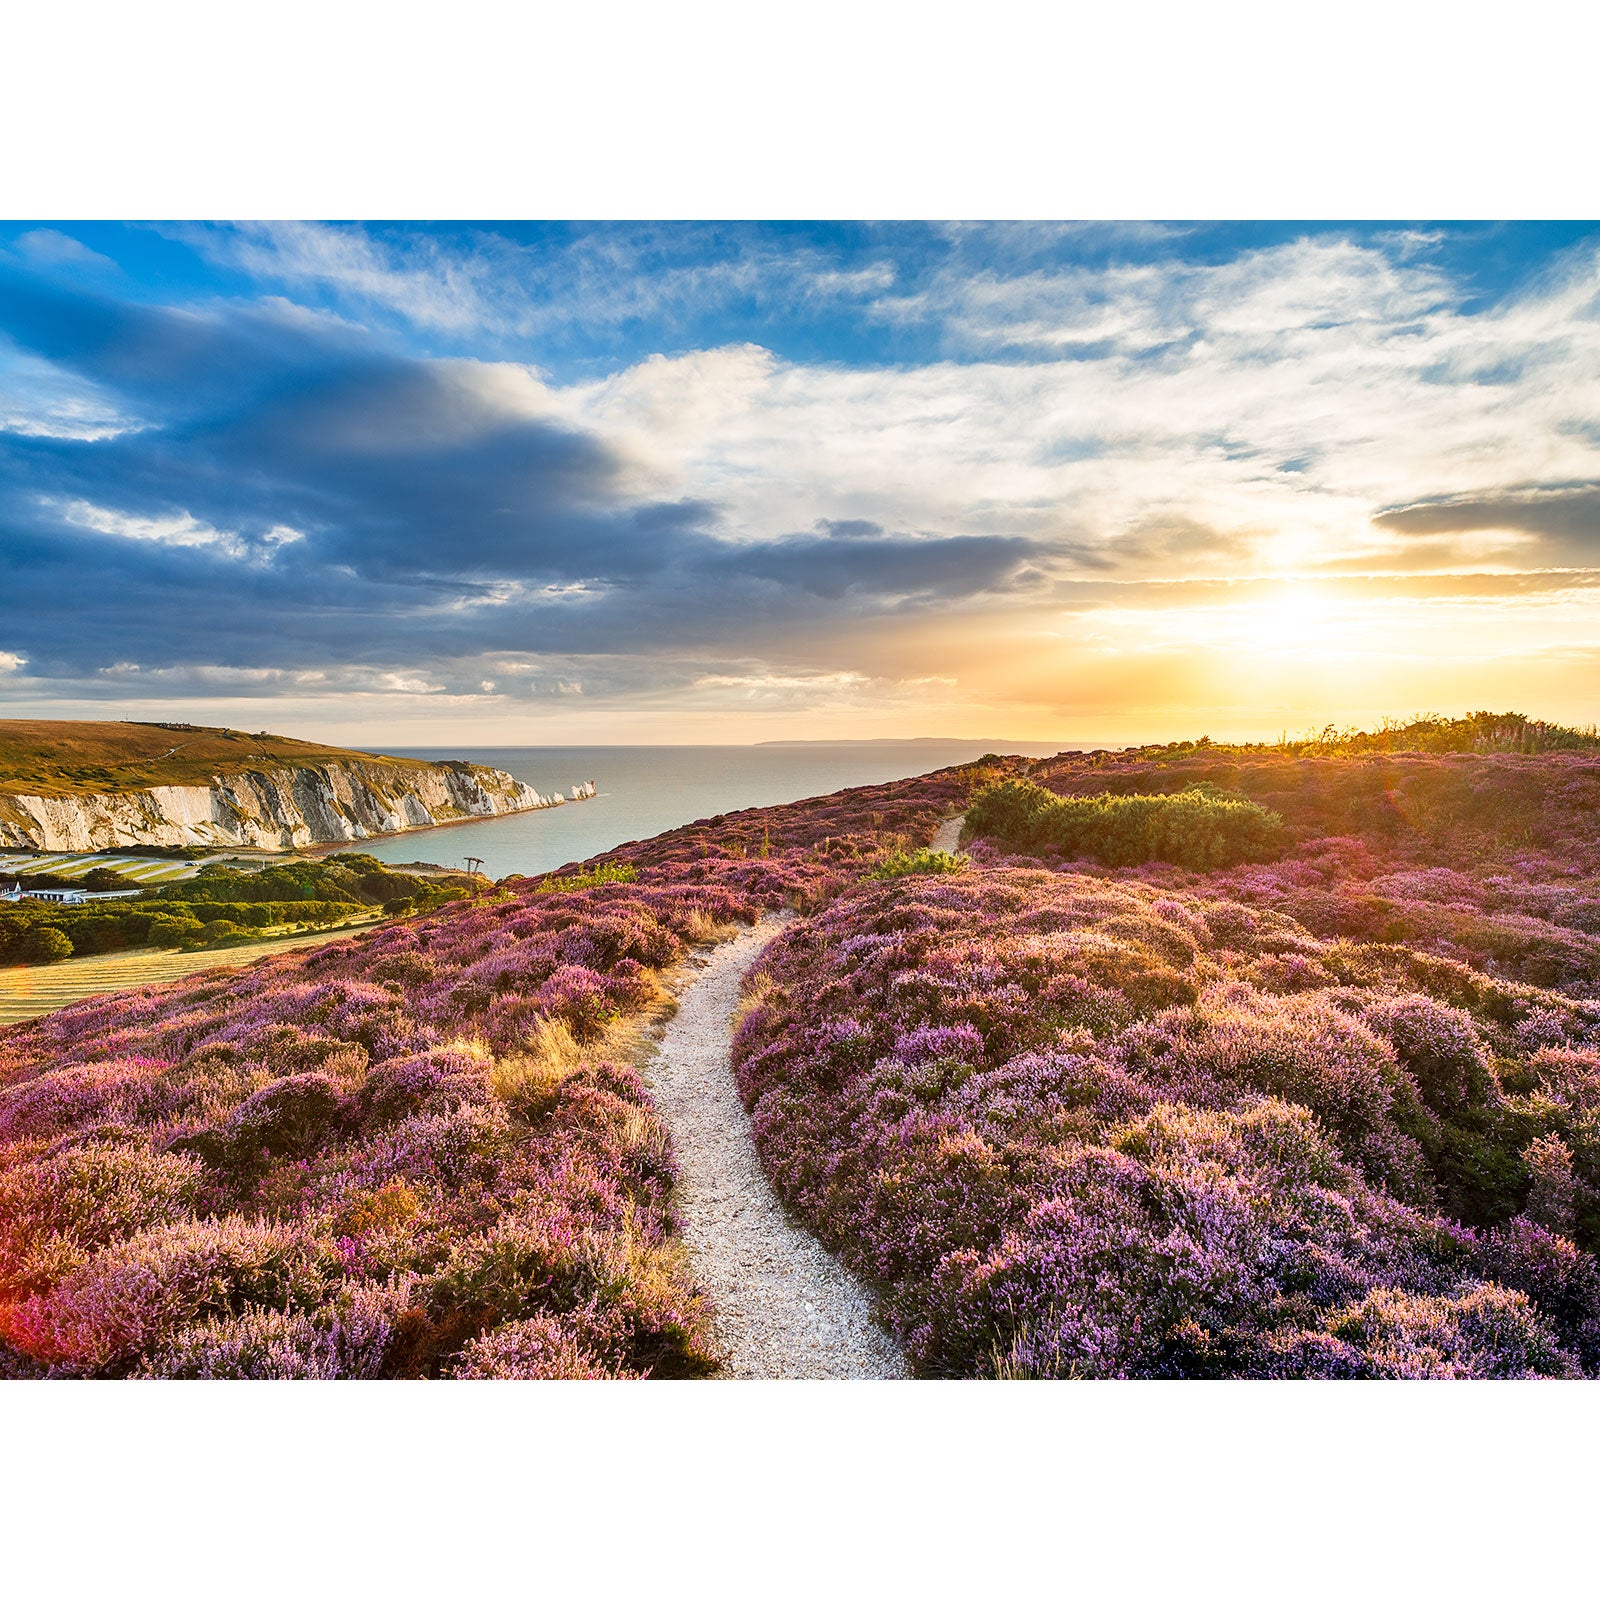 A scenic coastal path on the Isle surrounded by blooming heather at sunset, captured beautifully by Available Light Photography's Headon Warren.